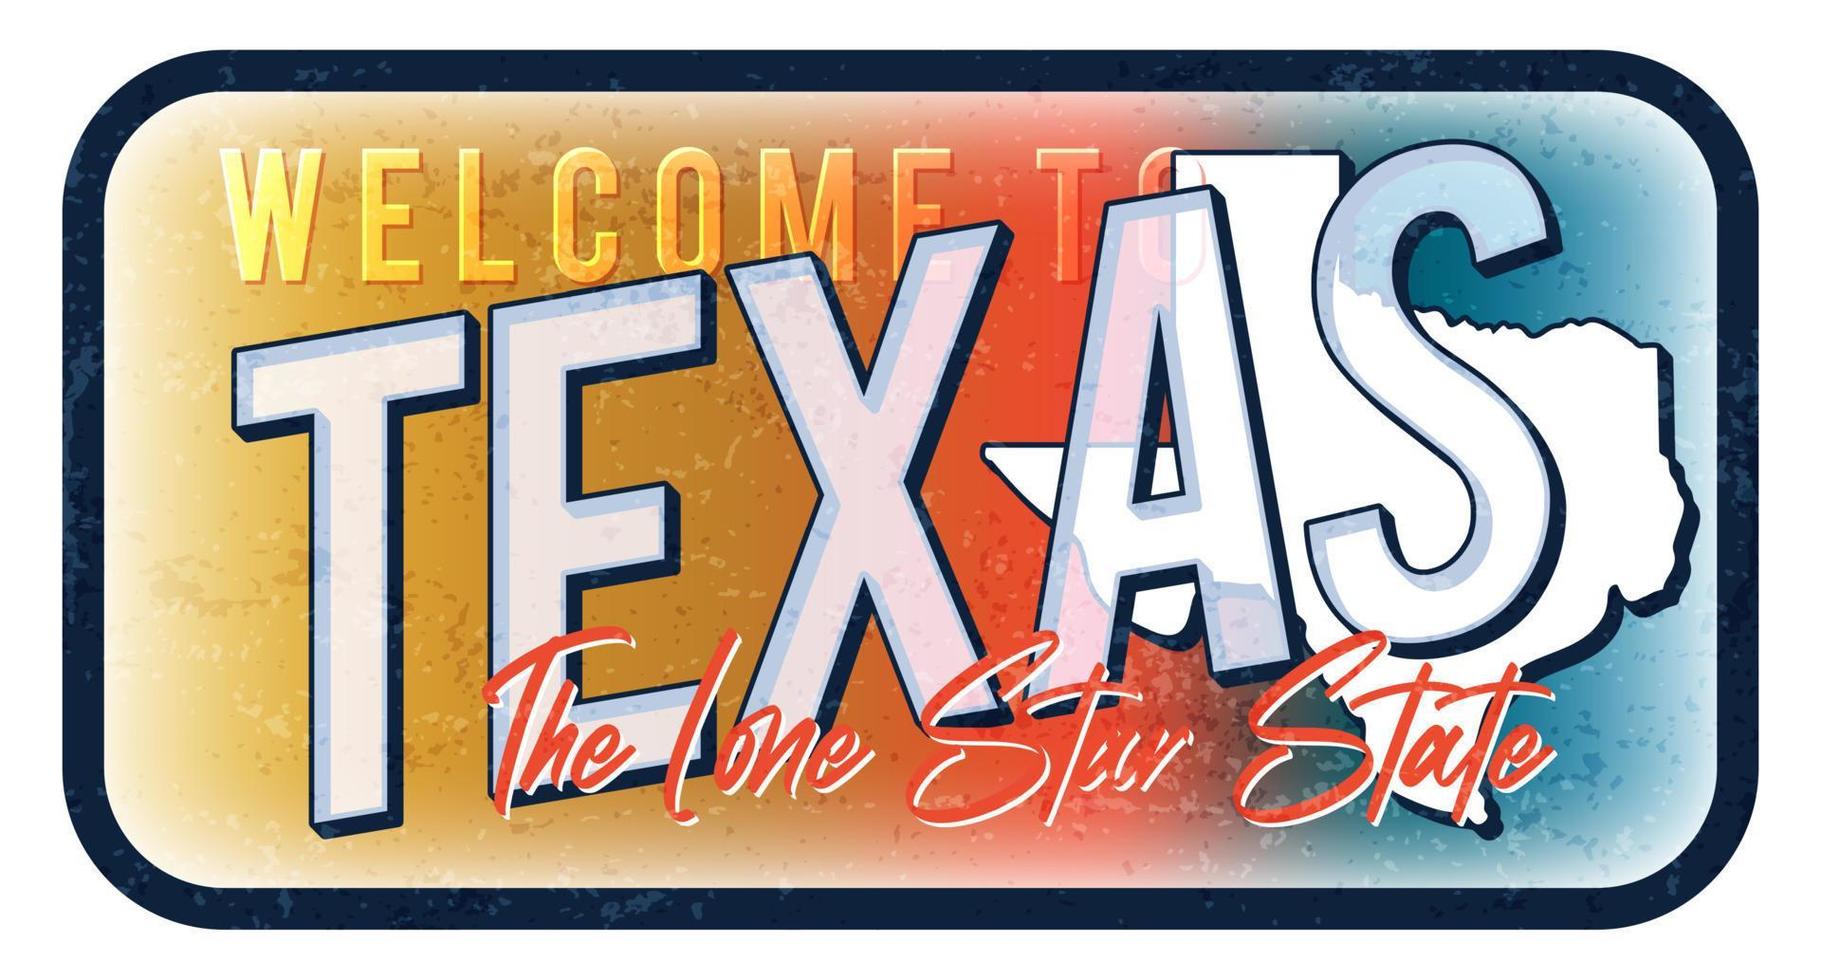 Welcome to Texas vintage rusty metal sign vector illustration. Vector state map in grunge style with Typography hand drawn lettering